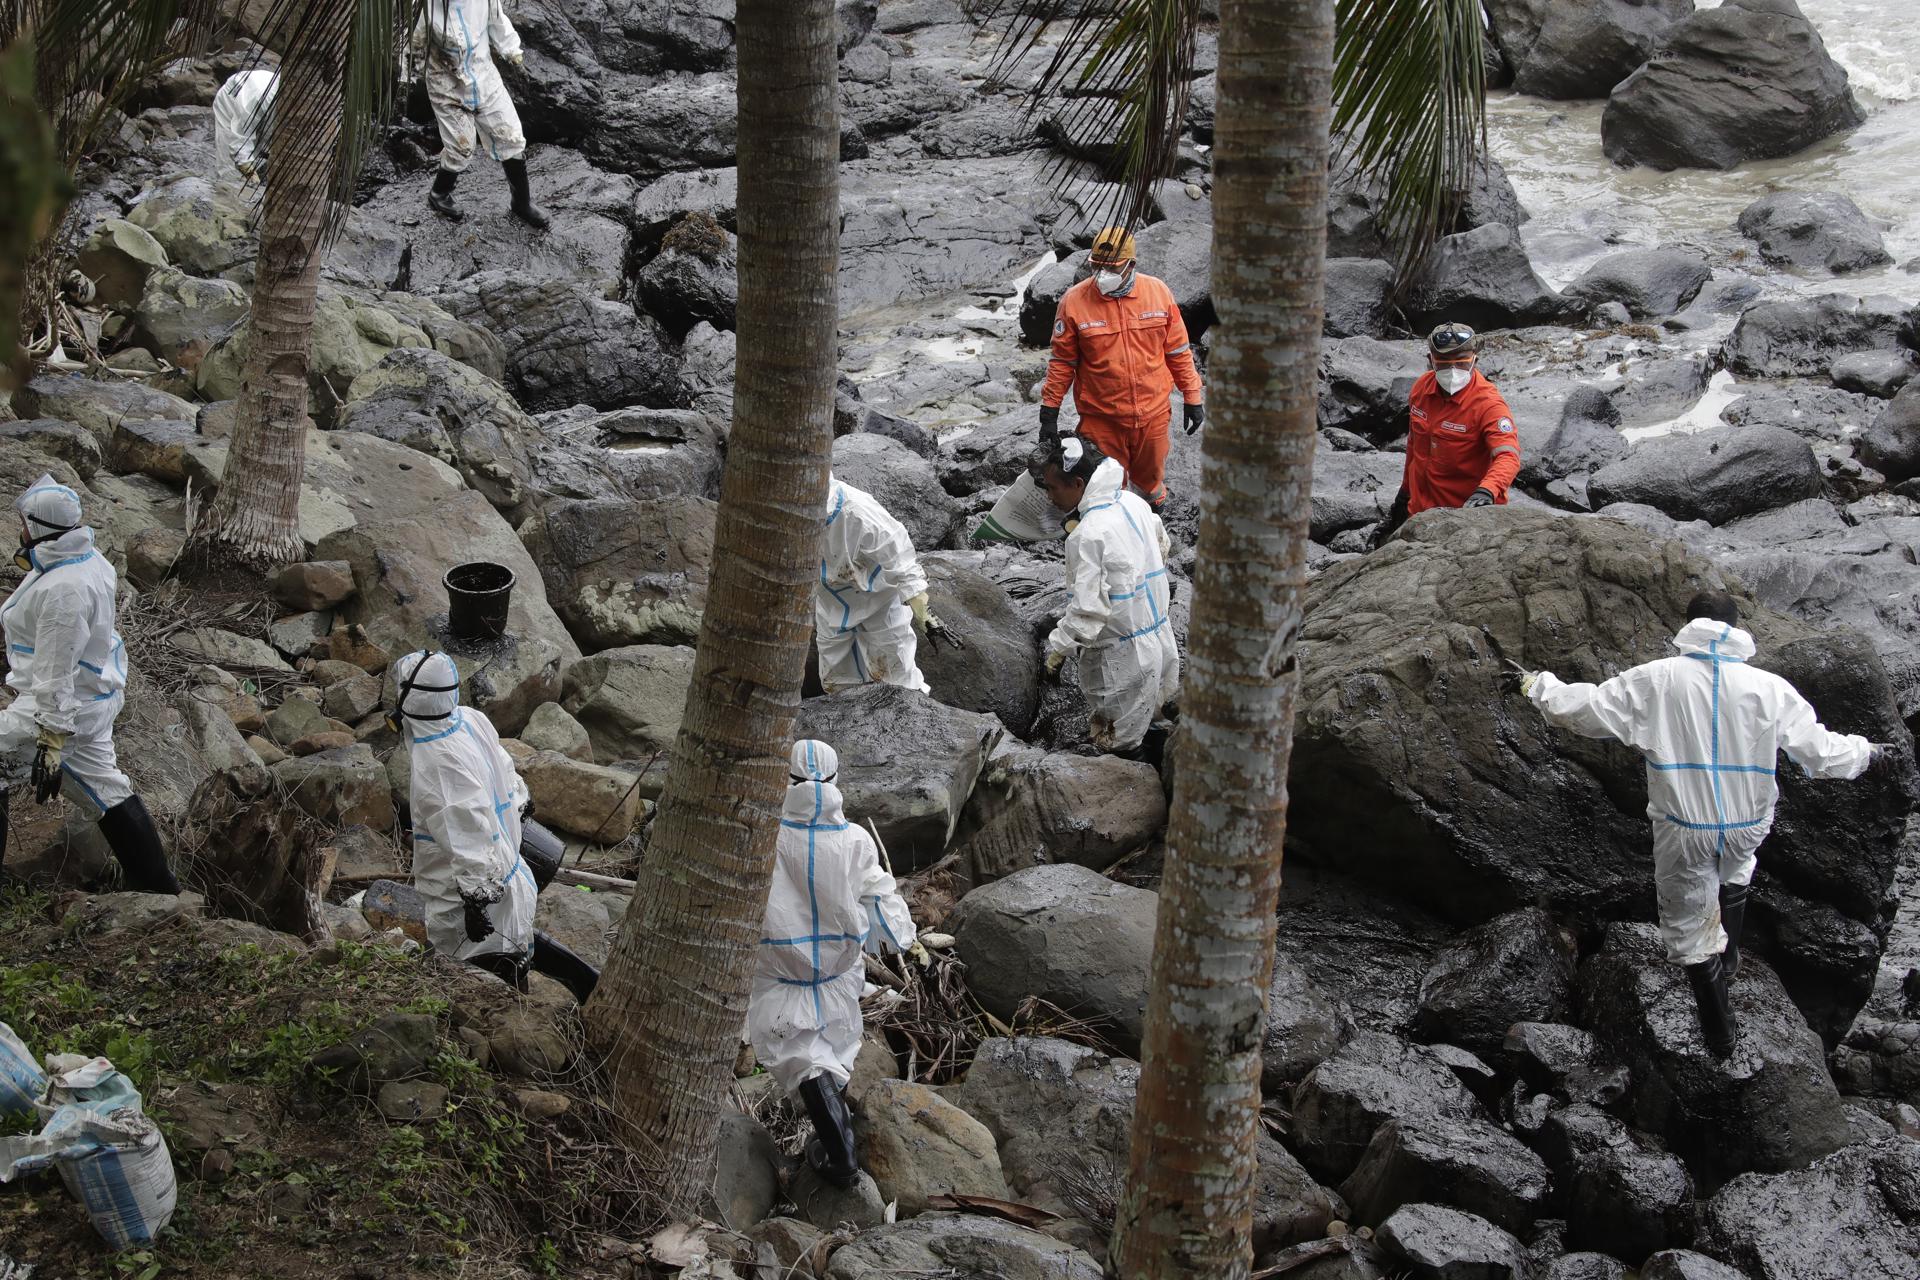 Filipino fishermen and coastguard personnel wearing protective suits collect oily waste along a beach in the coastal town of Pola, Mindoro island, Philippines, 06 March 2023. EFE/EPA/FRANCIS R. MALASIG